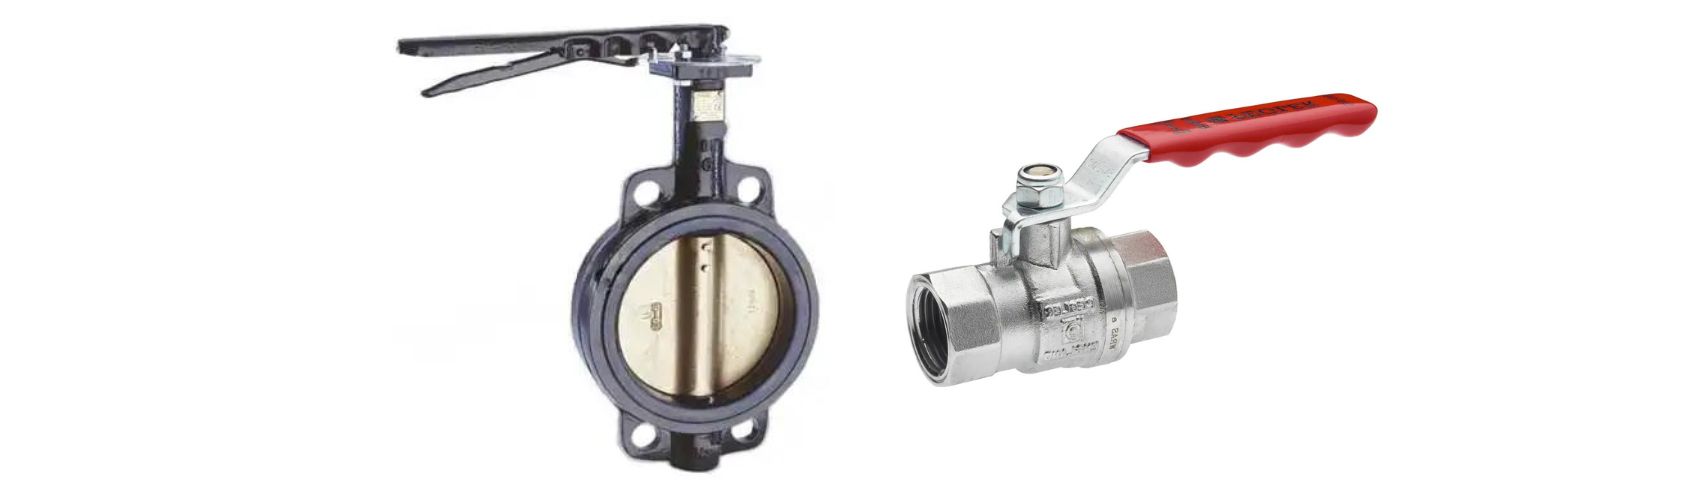 How to Maintain and Troubleshoot Actuated Ball Valves and Butterfly Valves?